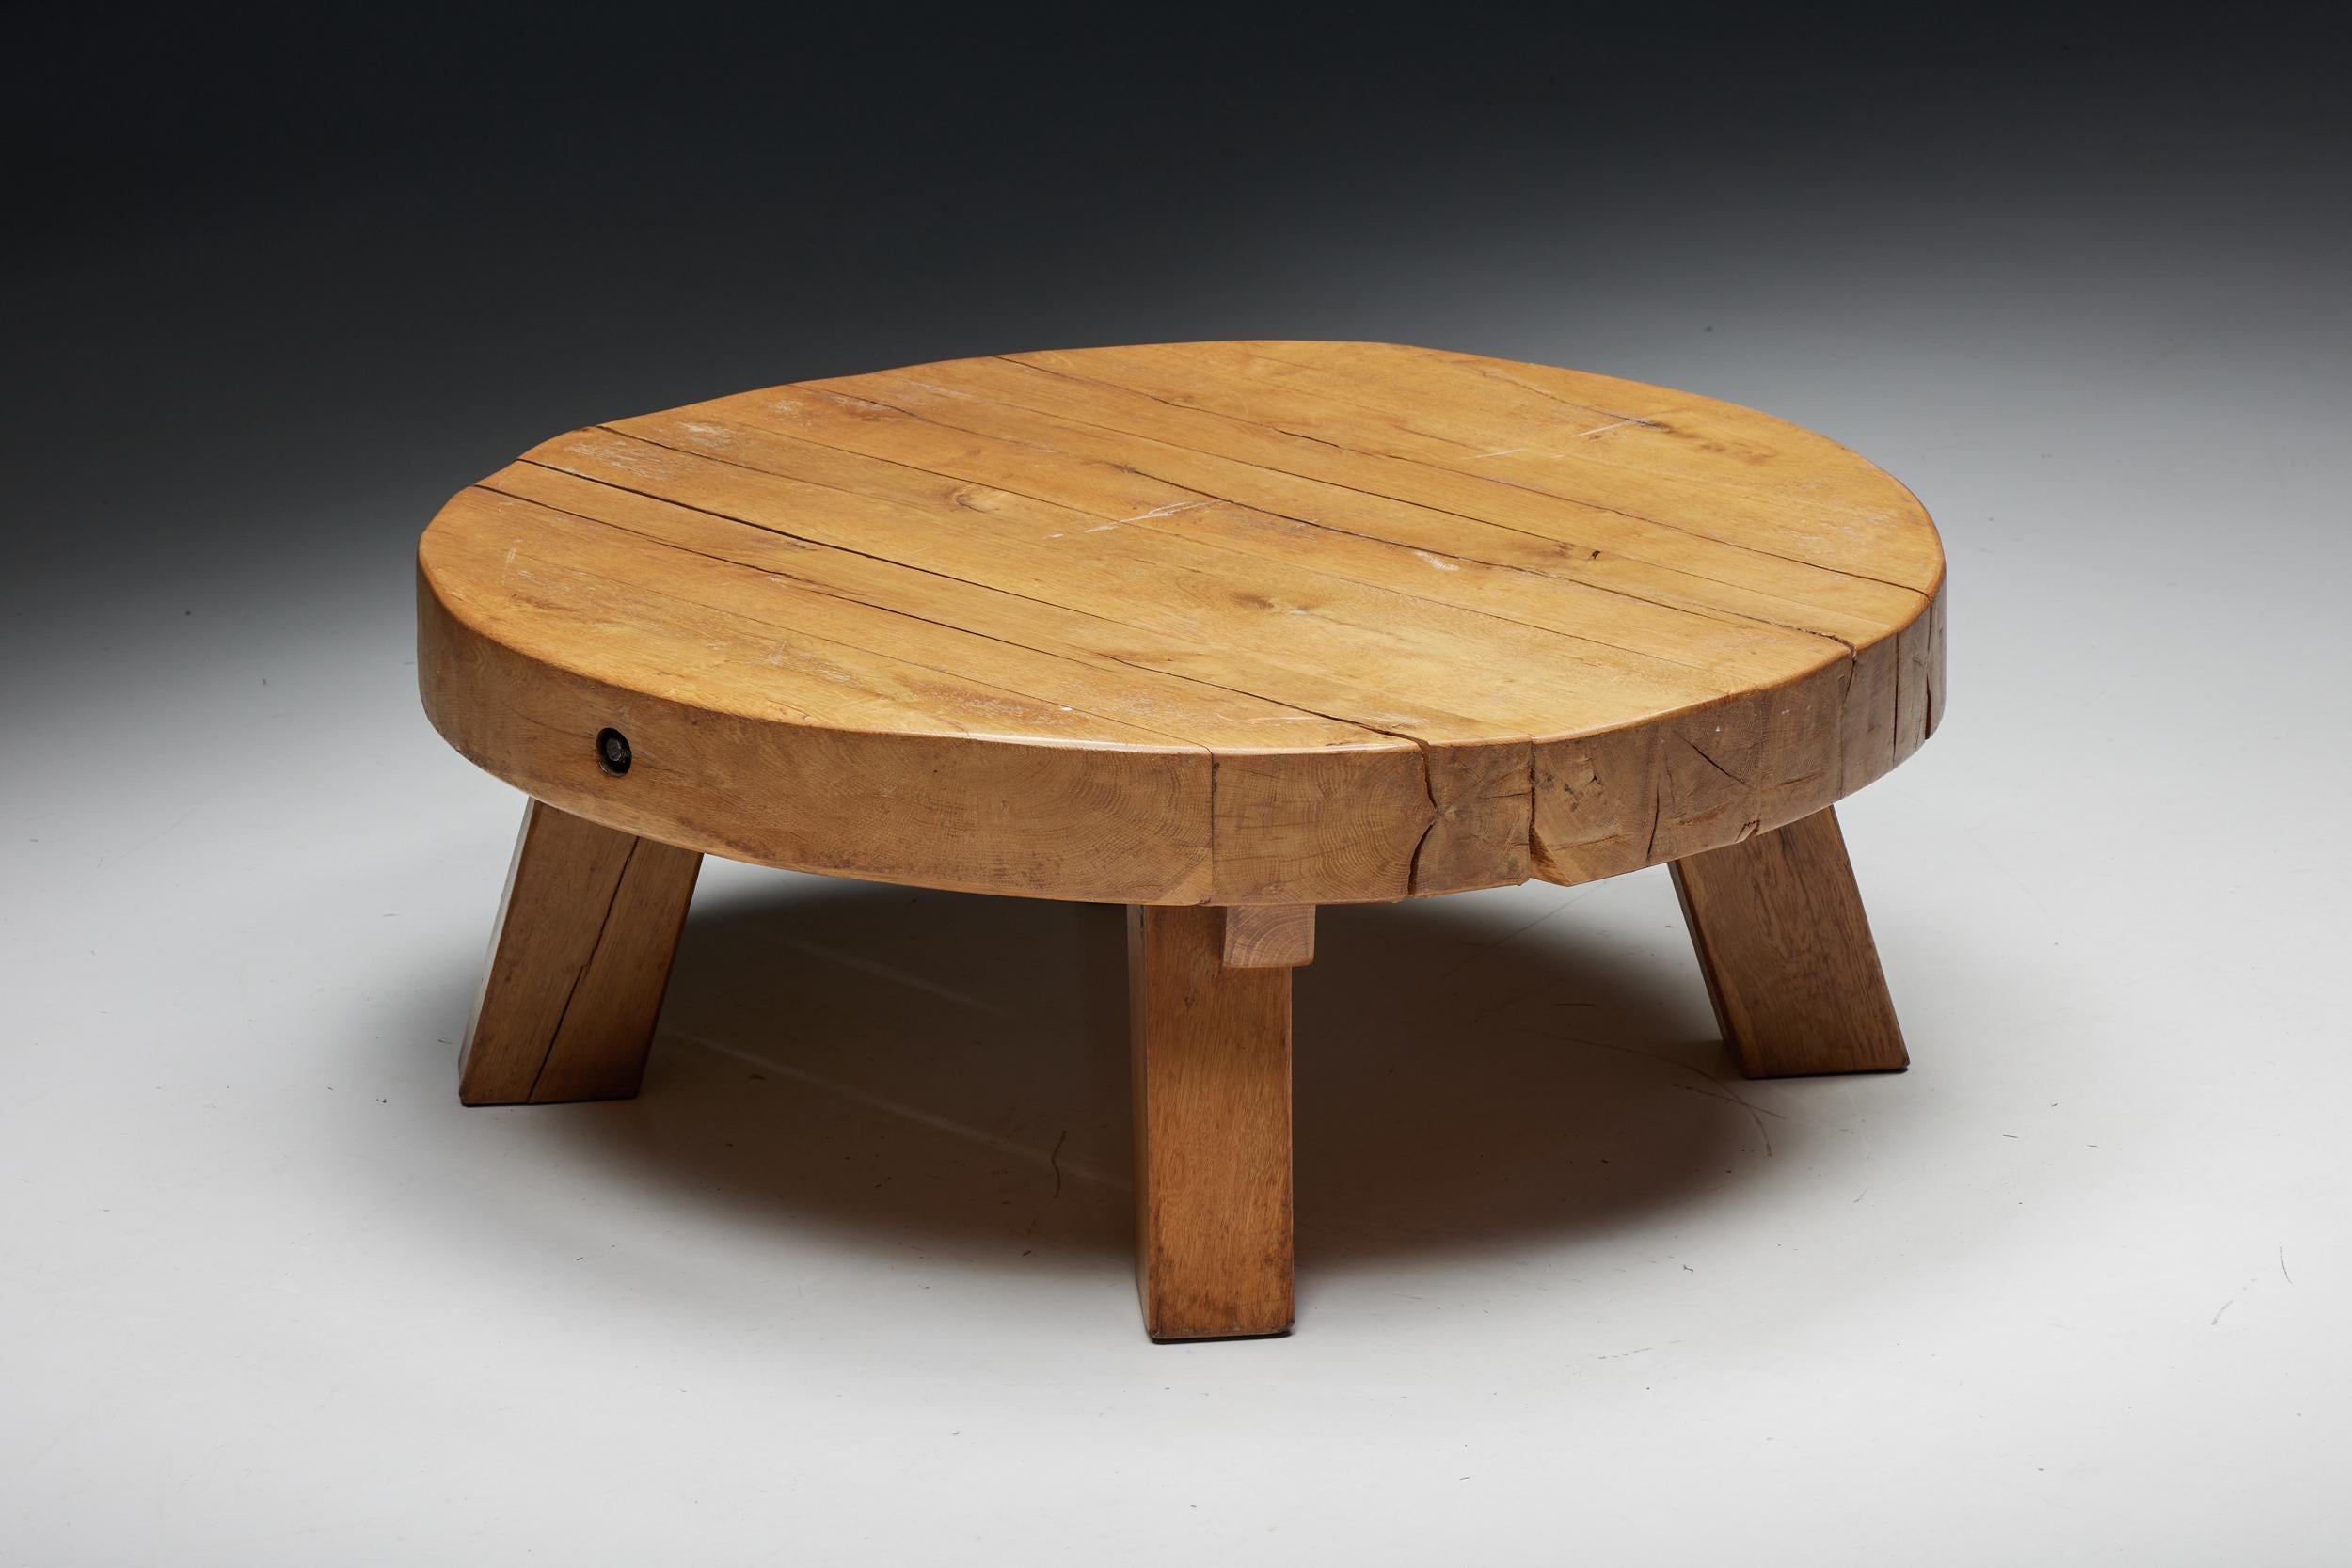 Rustic; Round; Rural; Robust; Wabi-Sabi; Wooden; Coffee table; France; 1950s;

This rustic round coffee table with a four-legged base is made of wood with a very charismatic patina. The rounded surface provides space for objects like books,